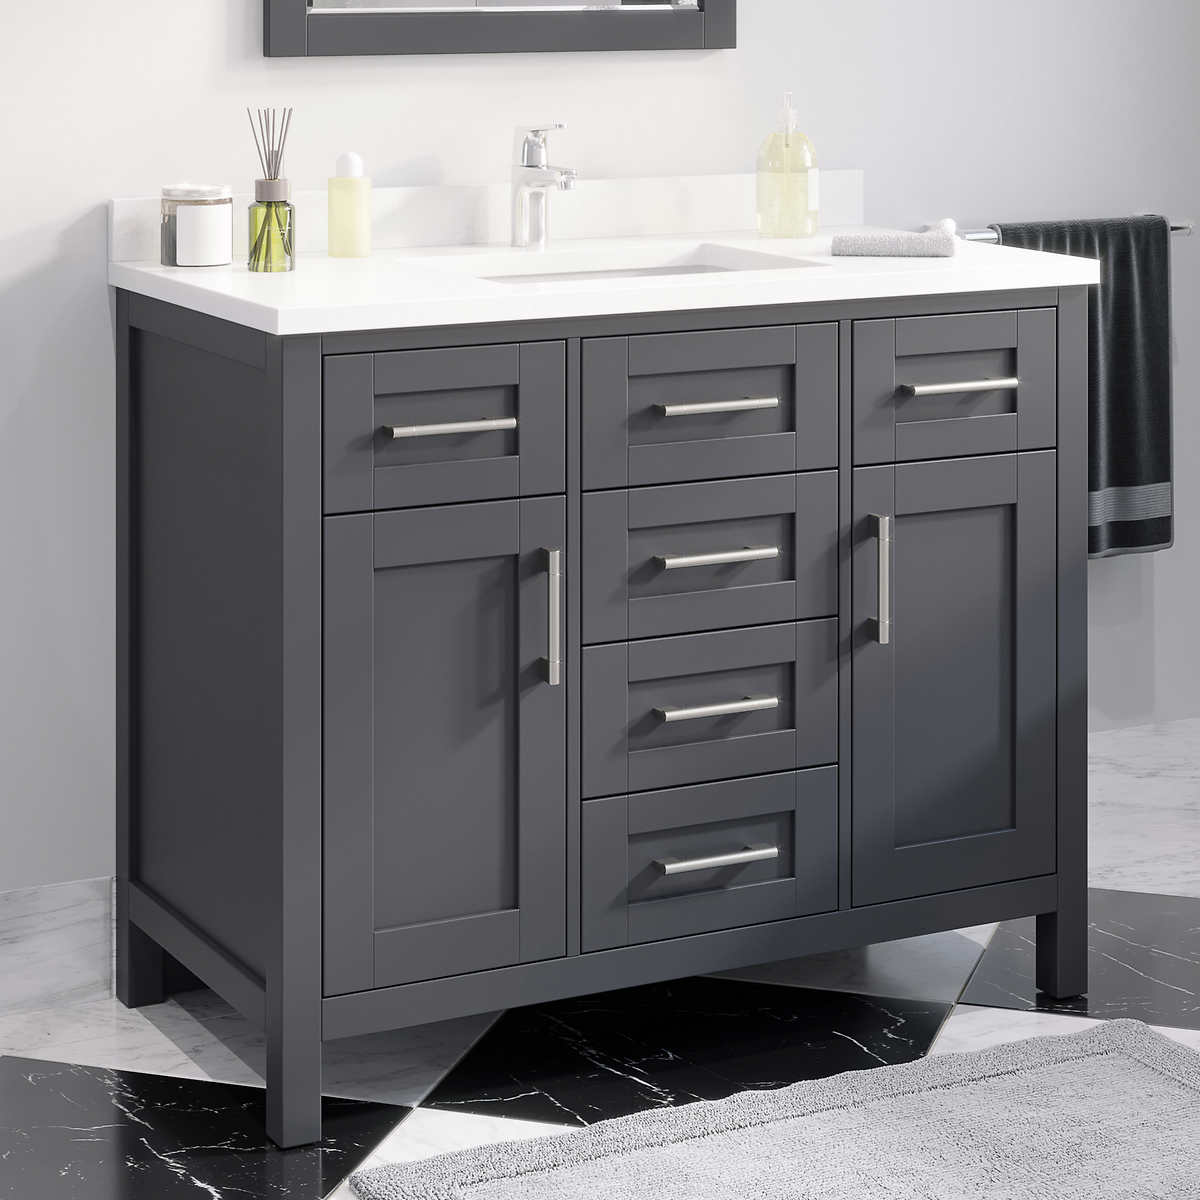 Ove 28 Utility Sink Cabinet | Cabinets Matttroy